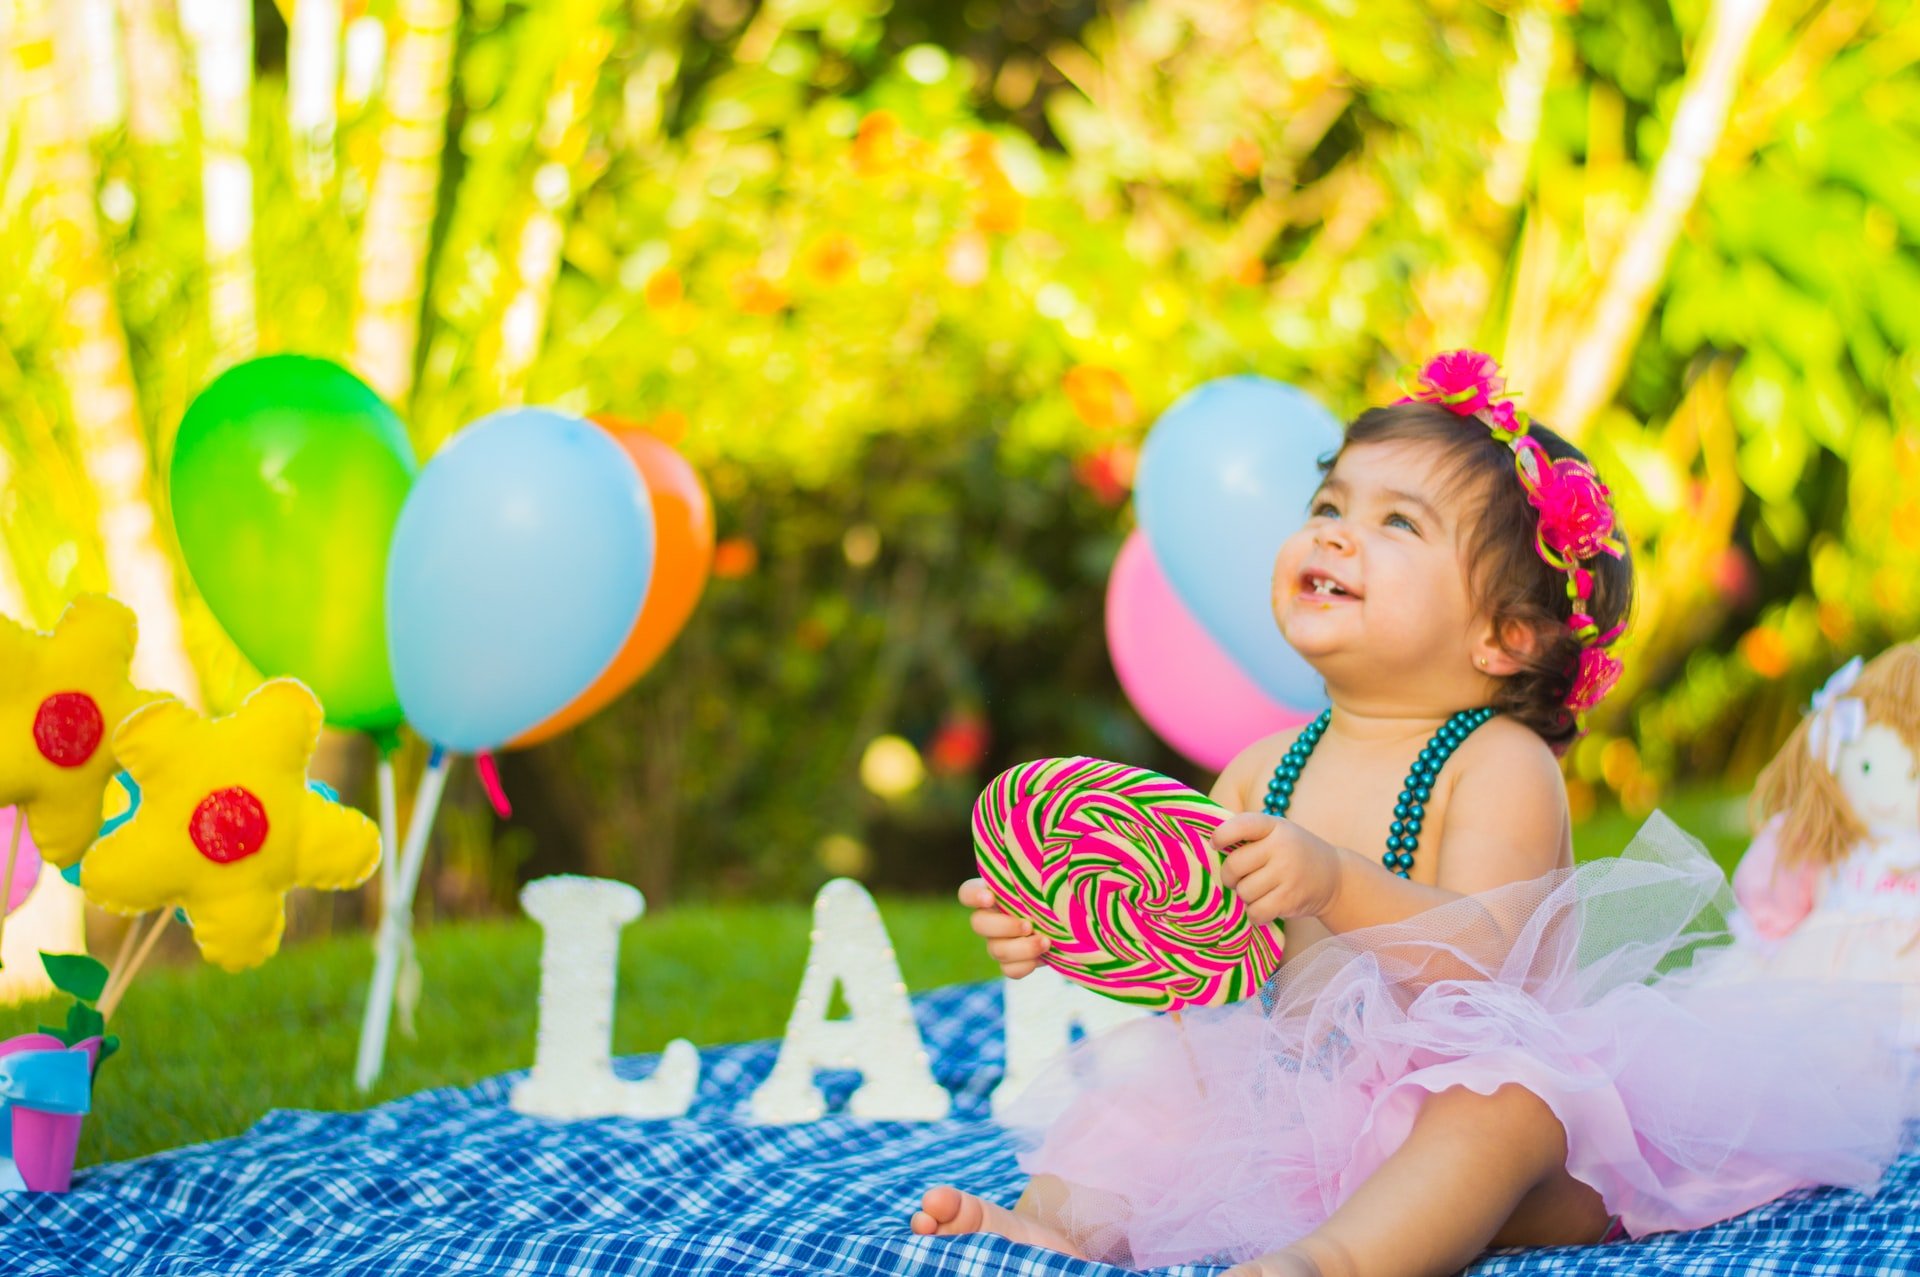 Another Redditor admitted throwing parties for his kids' birthdays because he wanted to have a good time. | Source: Unsplash